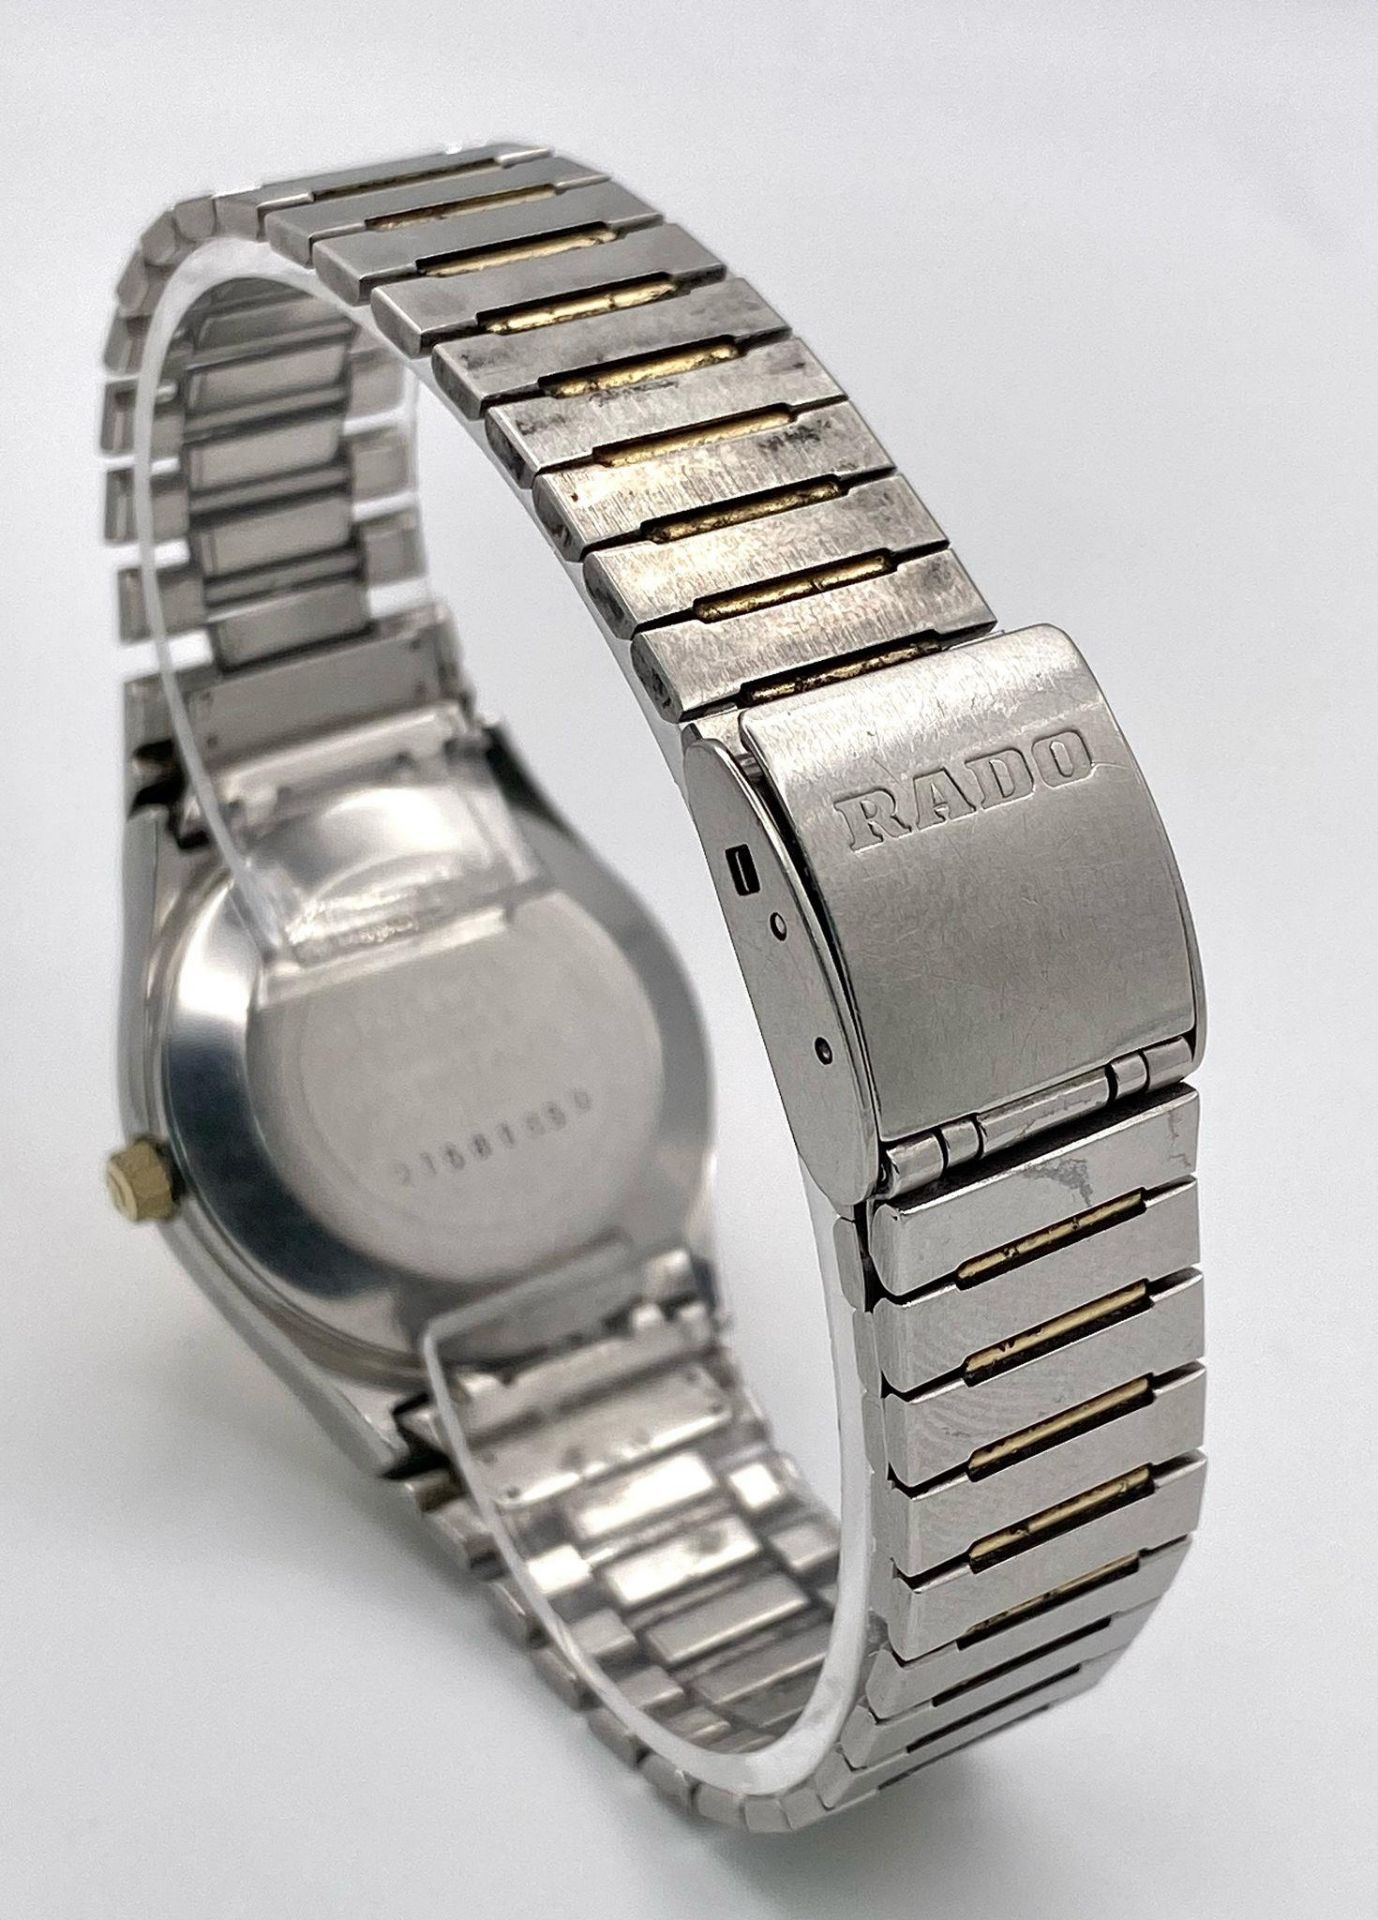 A Vintage Rado Voyager Automatic Unisex Watch. Stainless steel bracelet and case - 33mm. Gilded dial - Bild 5 aus 7